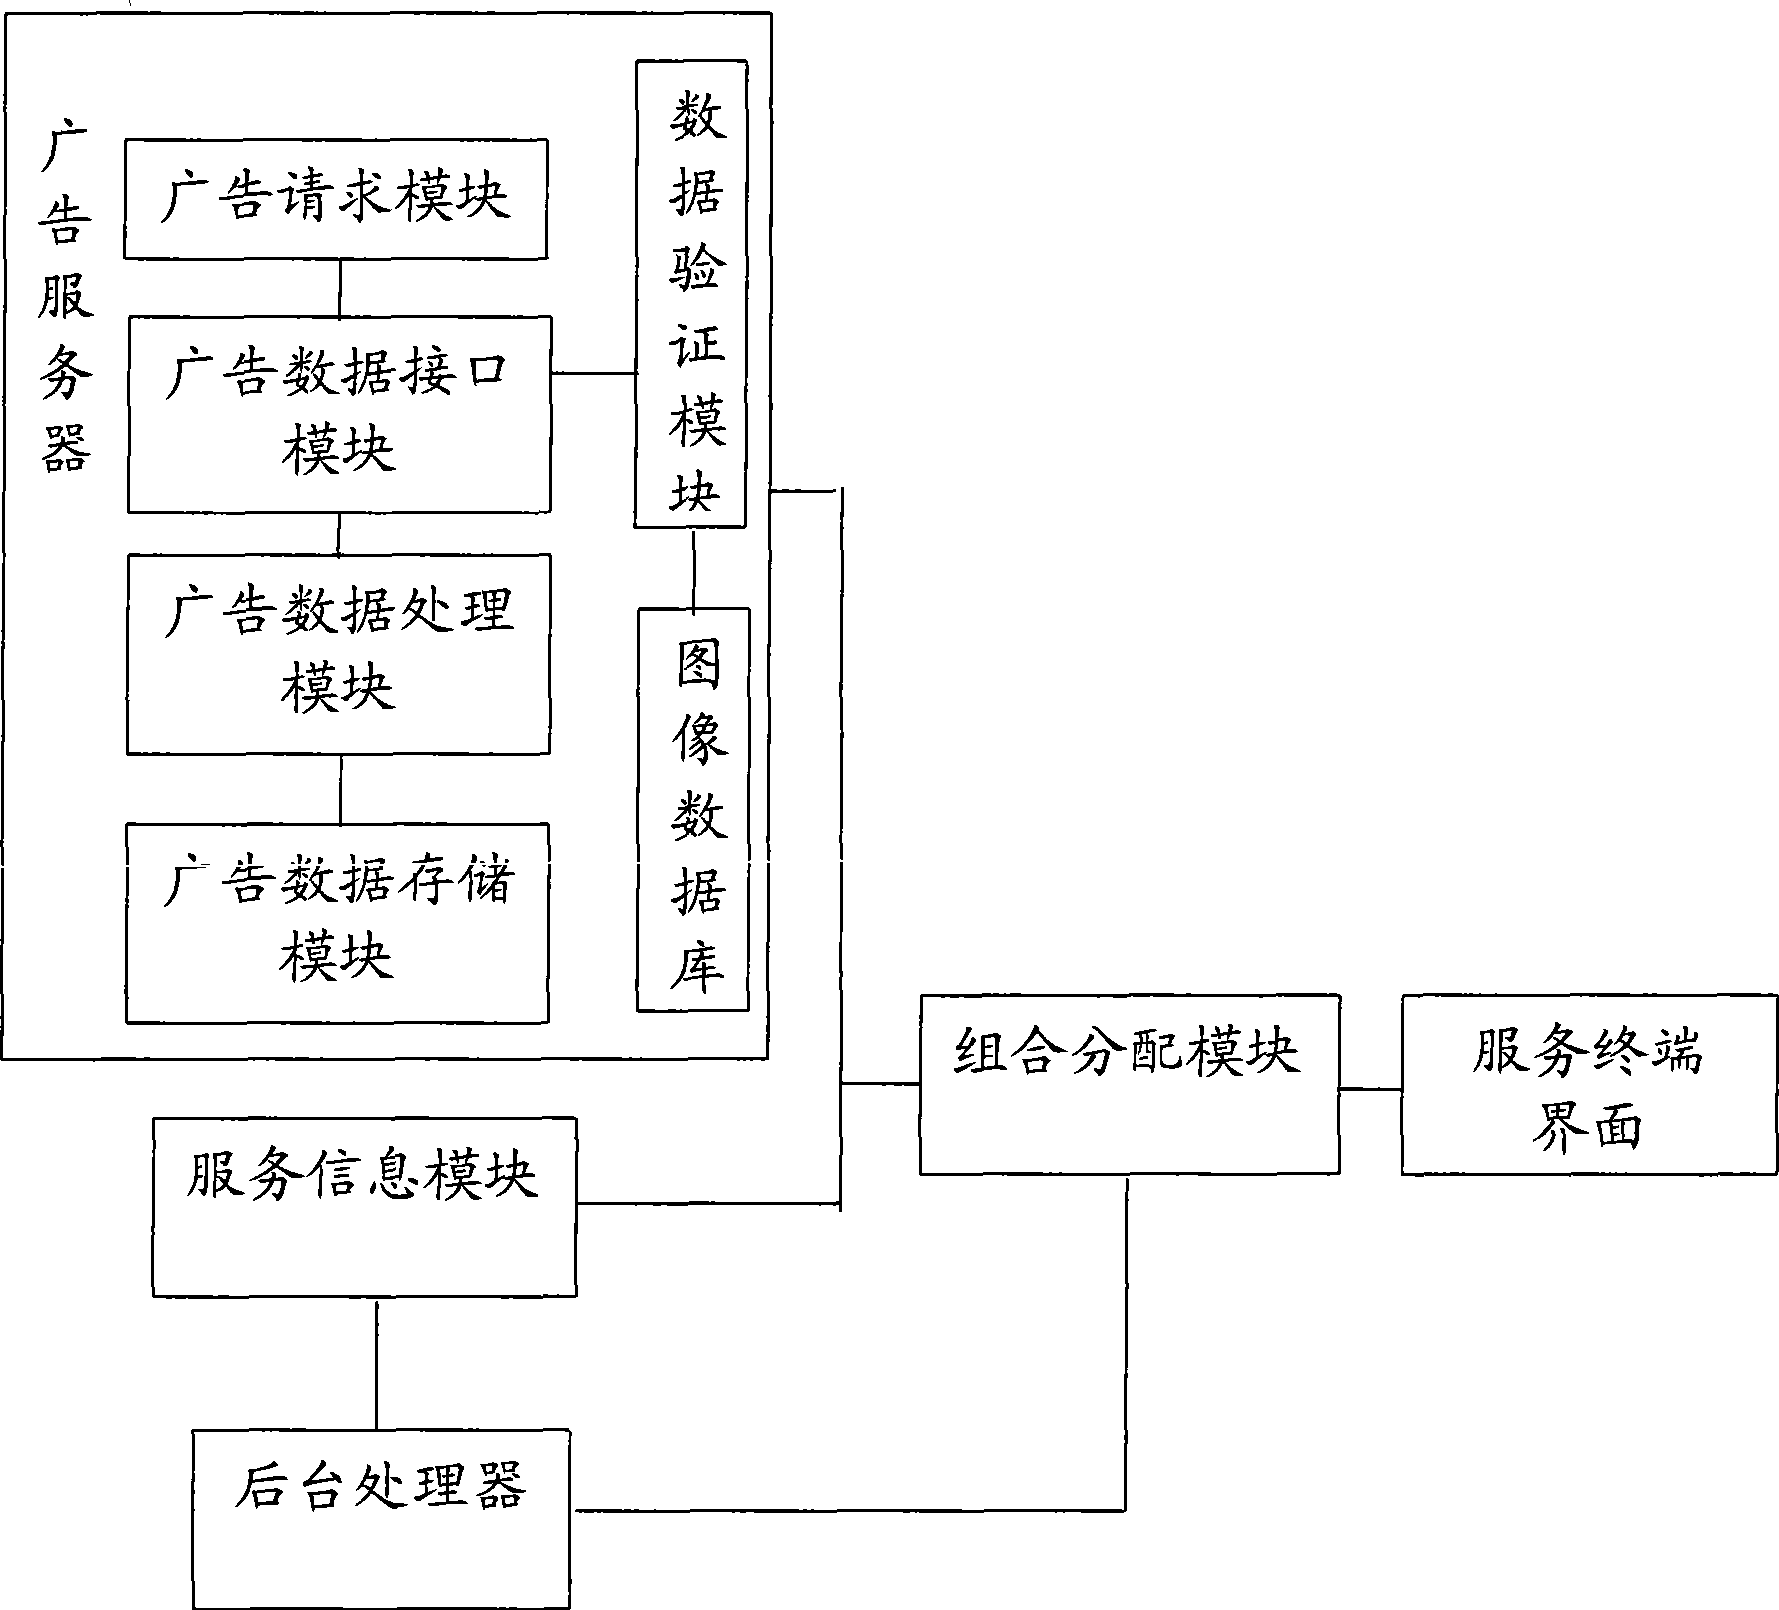 Combined delivery system for advertisement service information